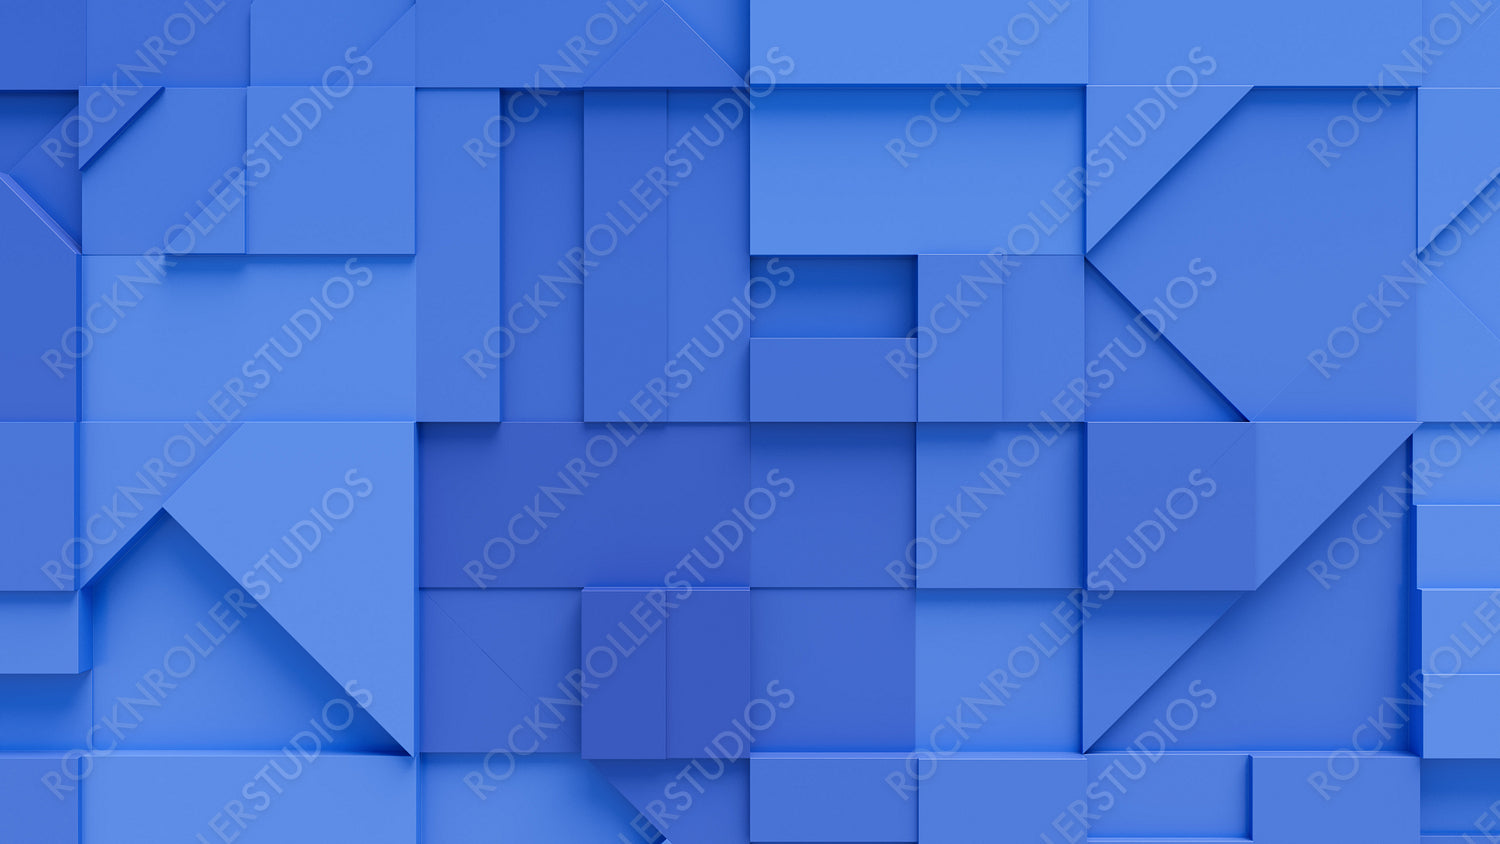 Collection of Blue 3D Blocks form a wall. Tech background .